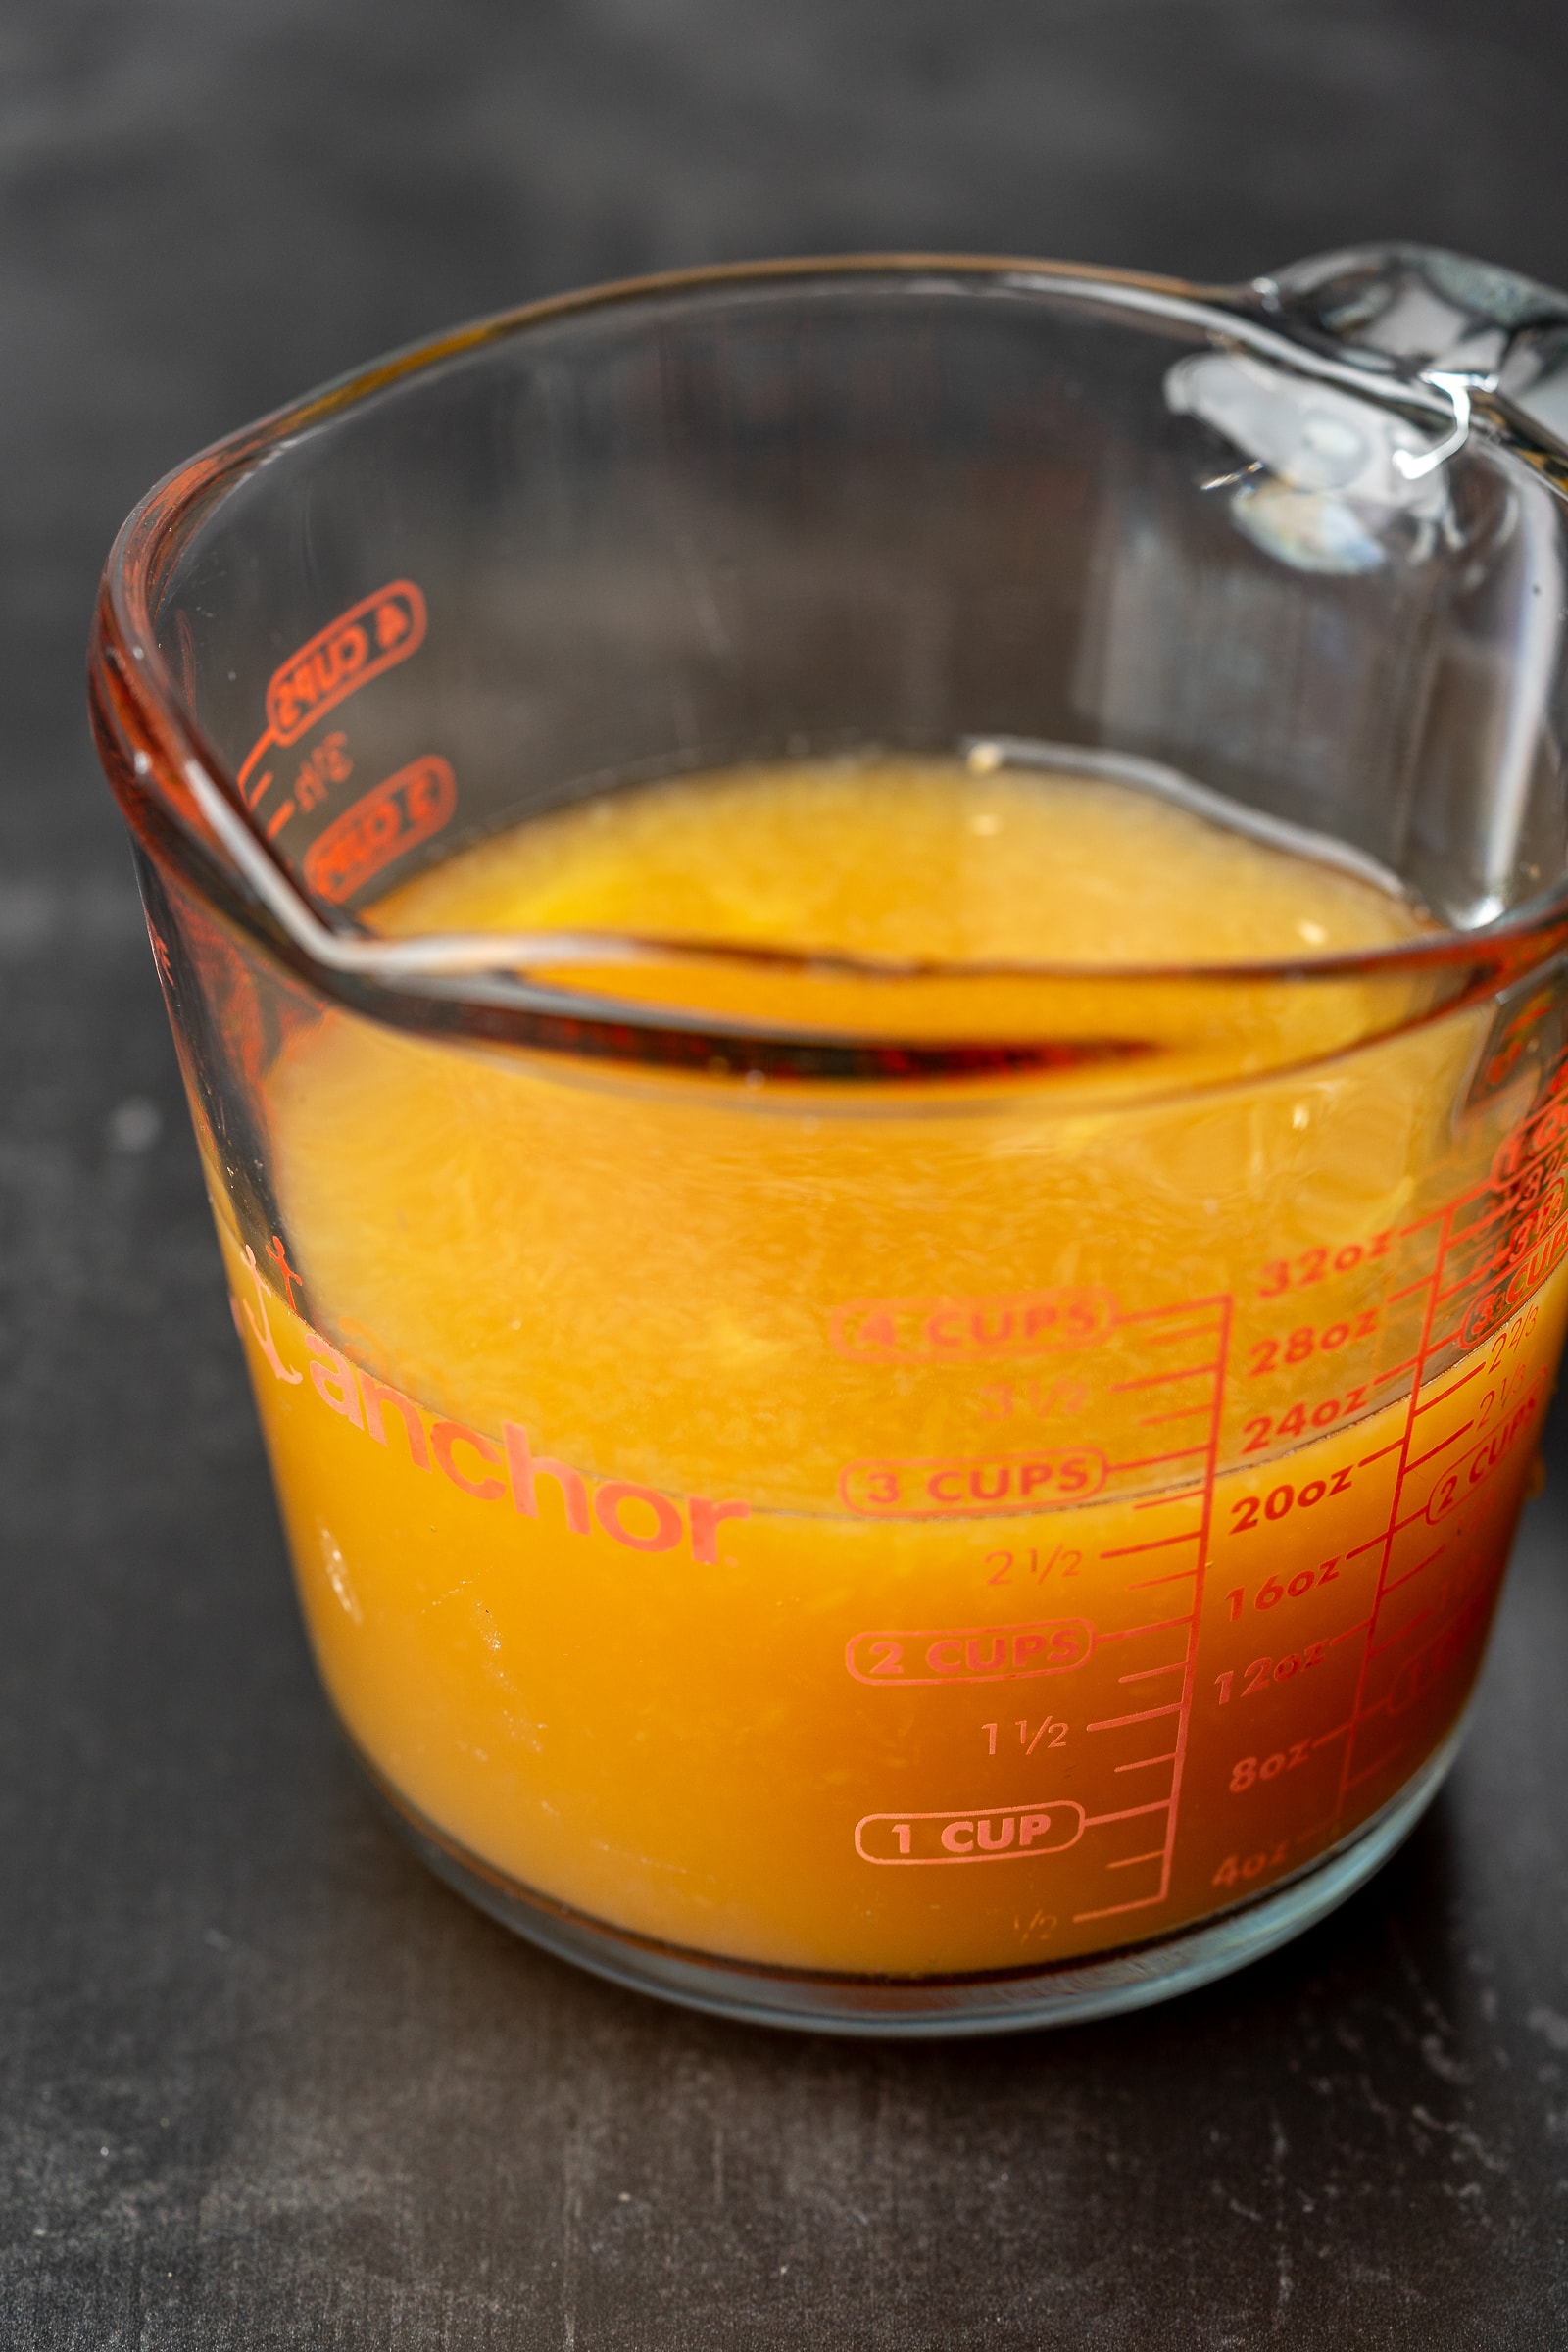 Orange juice and apple cider in a glass measuring cup.